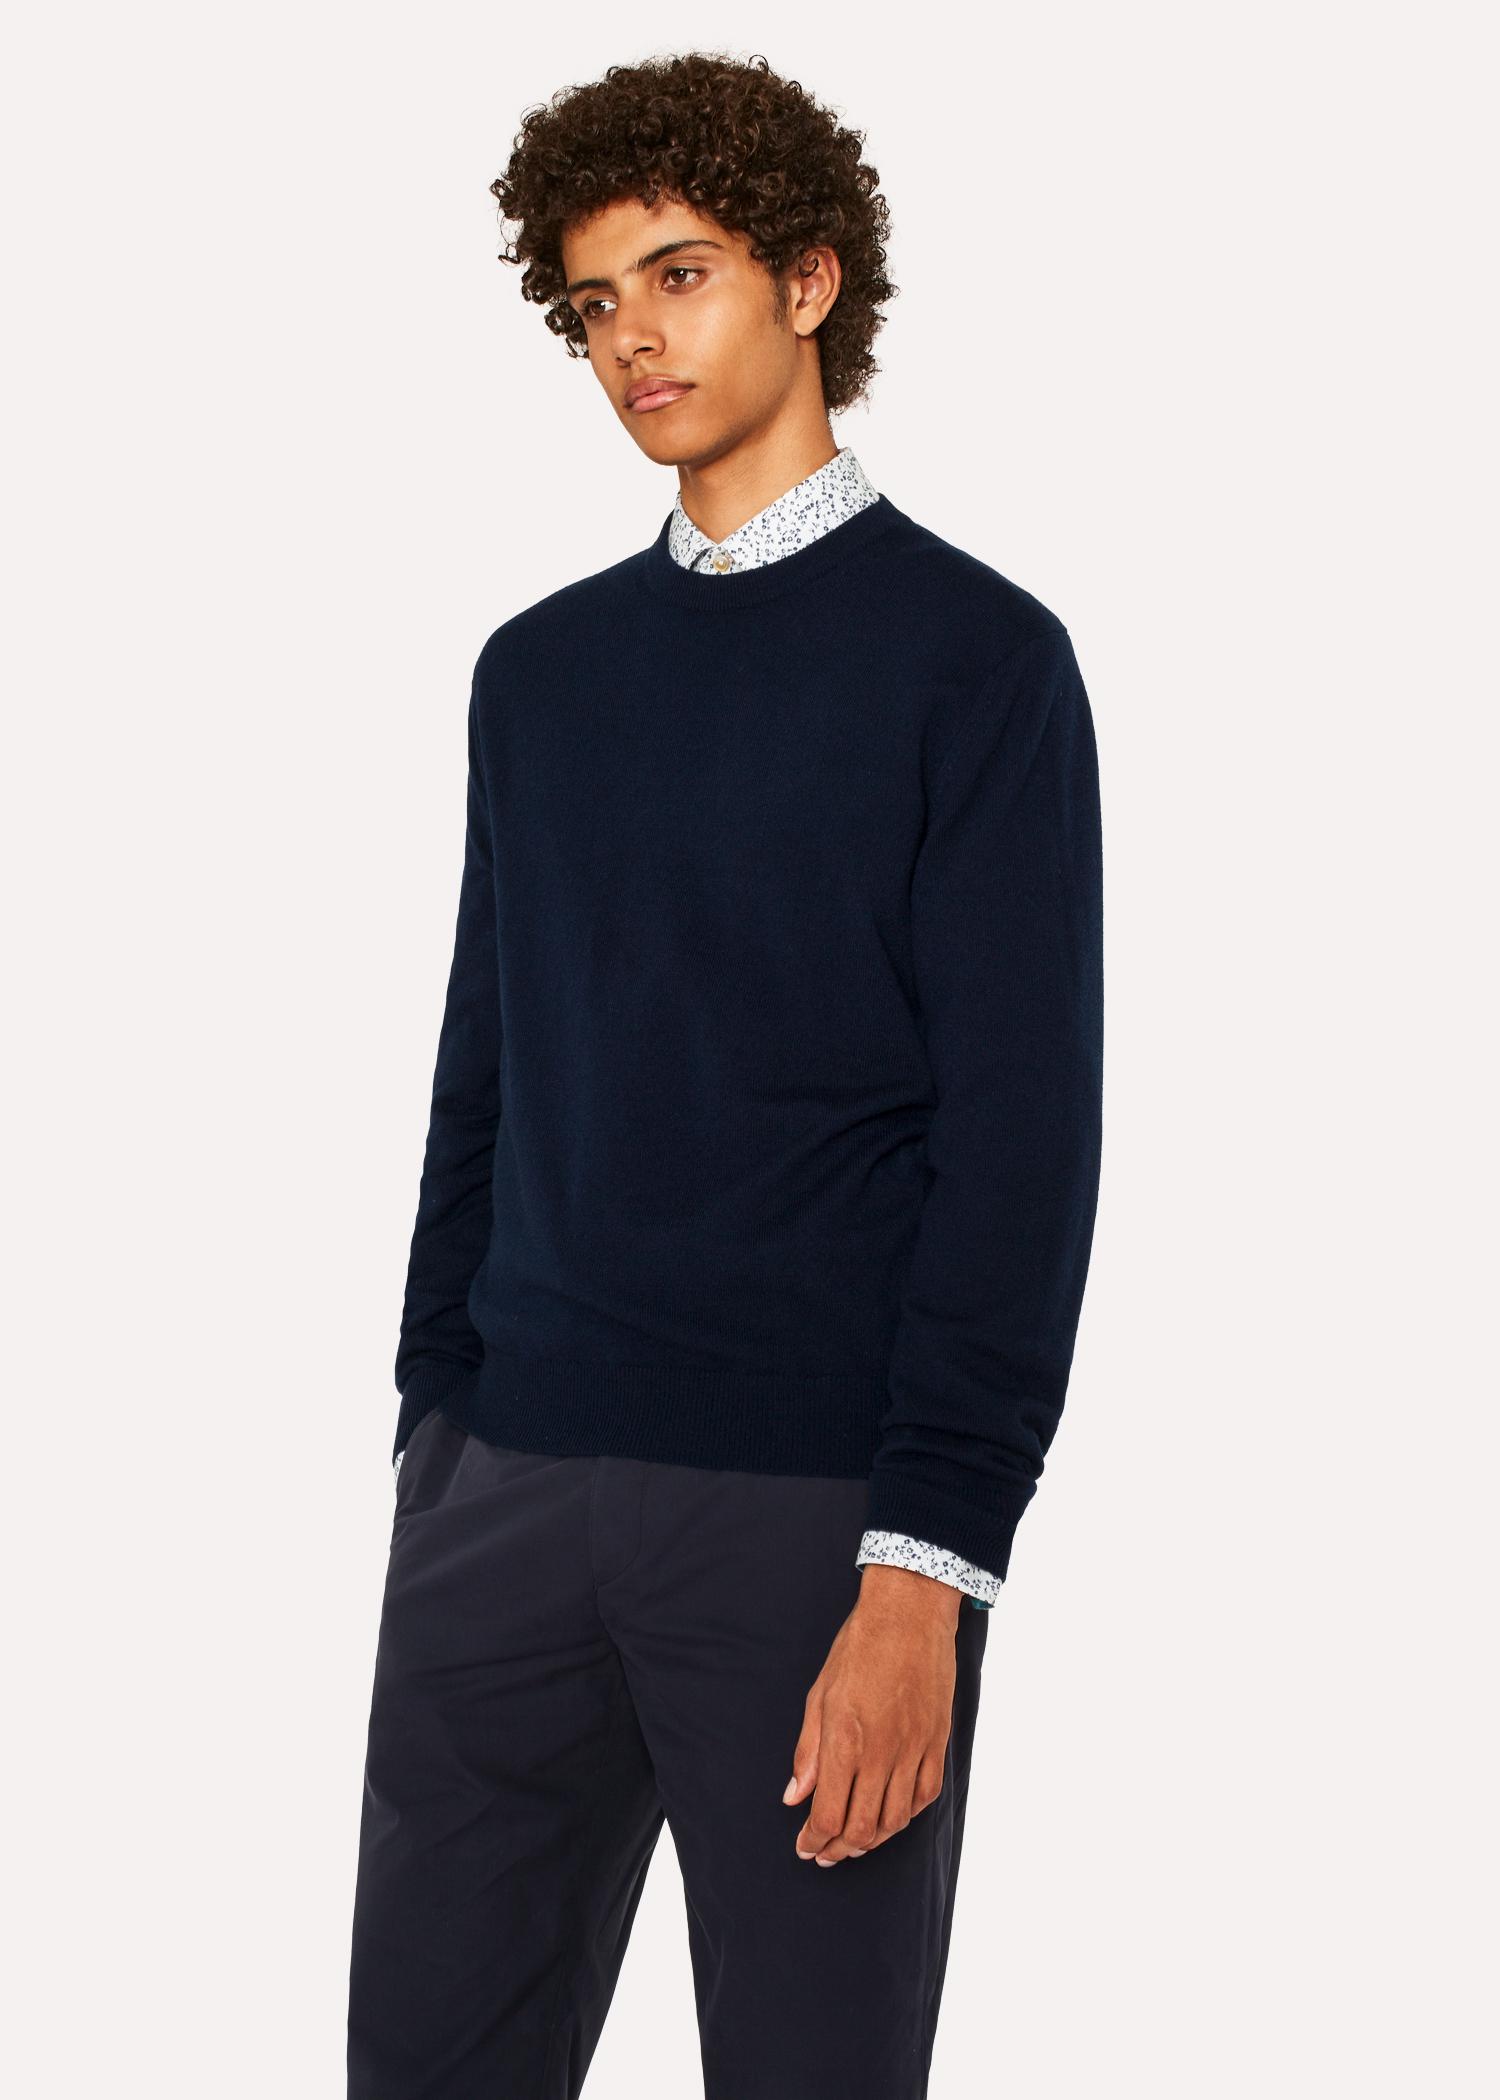 Paul Smith Navy Cashmere Crew Neck Sweater in Blue for Men - Lyst